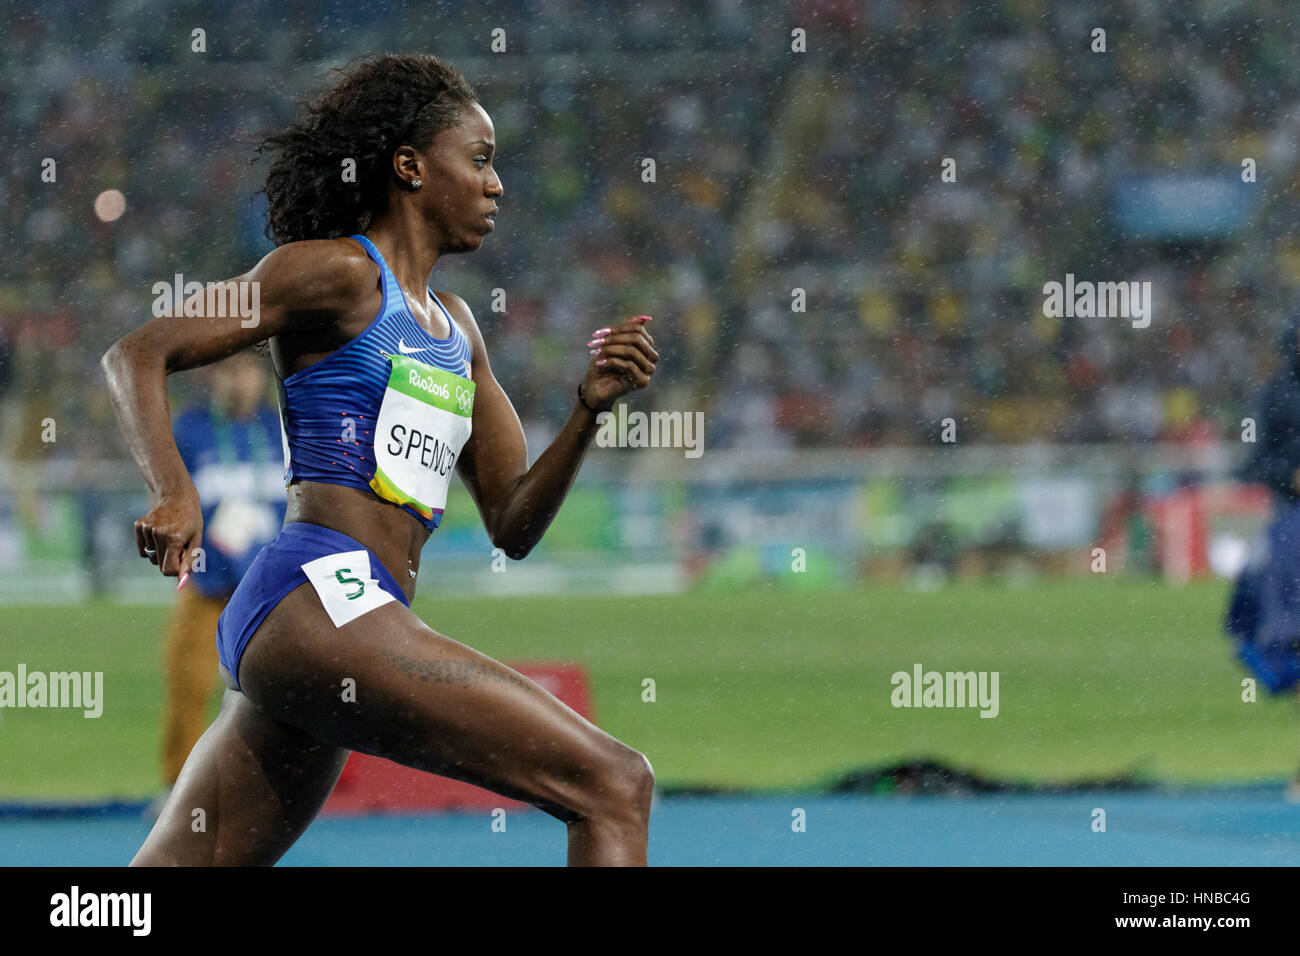 Rio de Janeiro, Brazil. 18 August 2016.  Athletics, Ashley Spencer (USA) competing in the Women's 400m Hurdles finals at the 2016 Olympic Summer Games Stock Photo